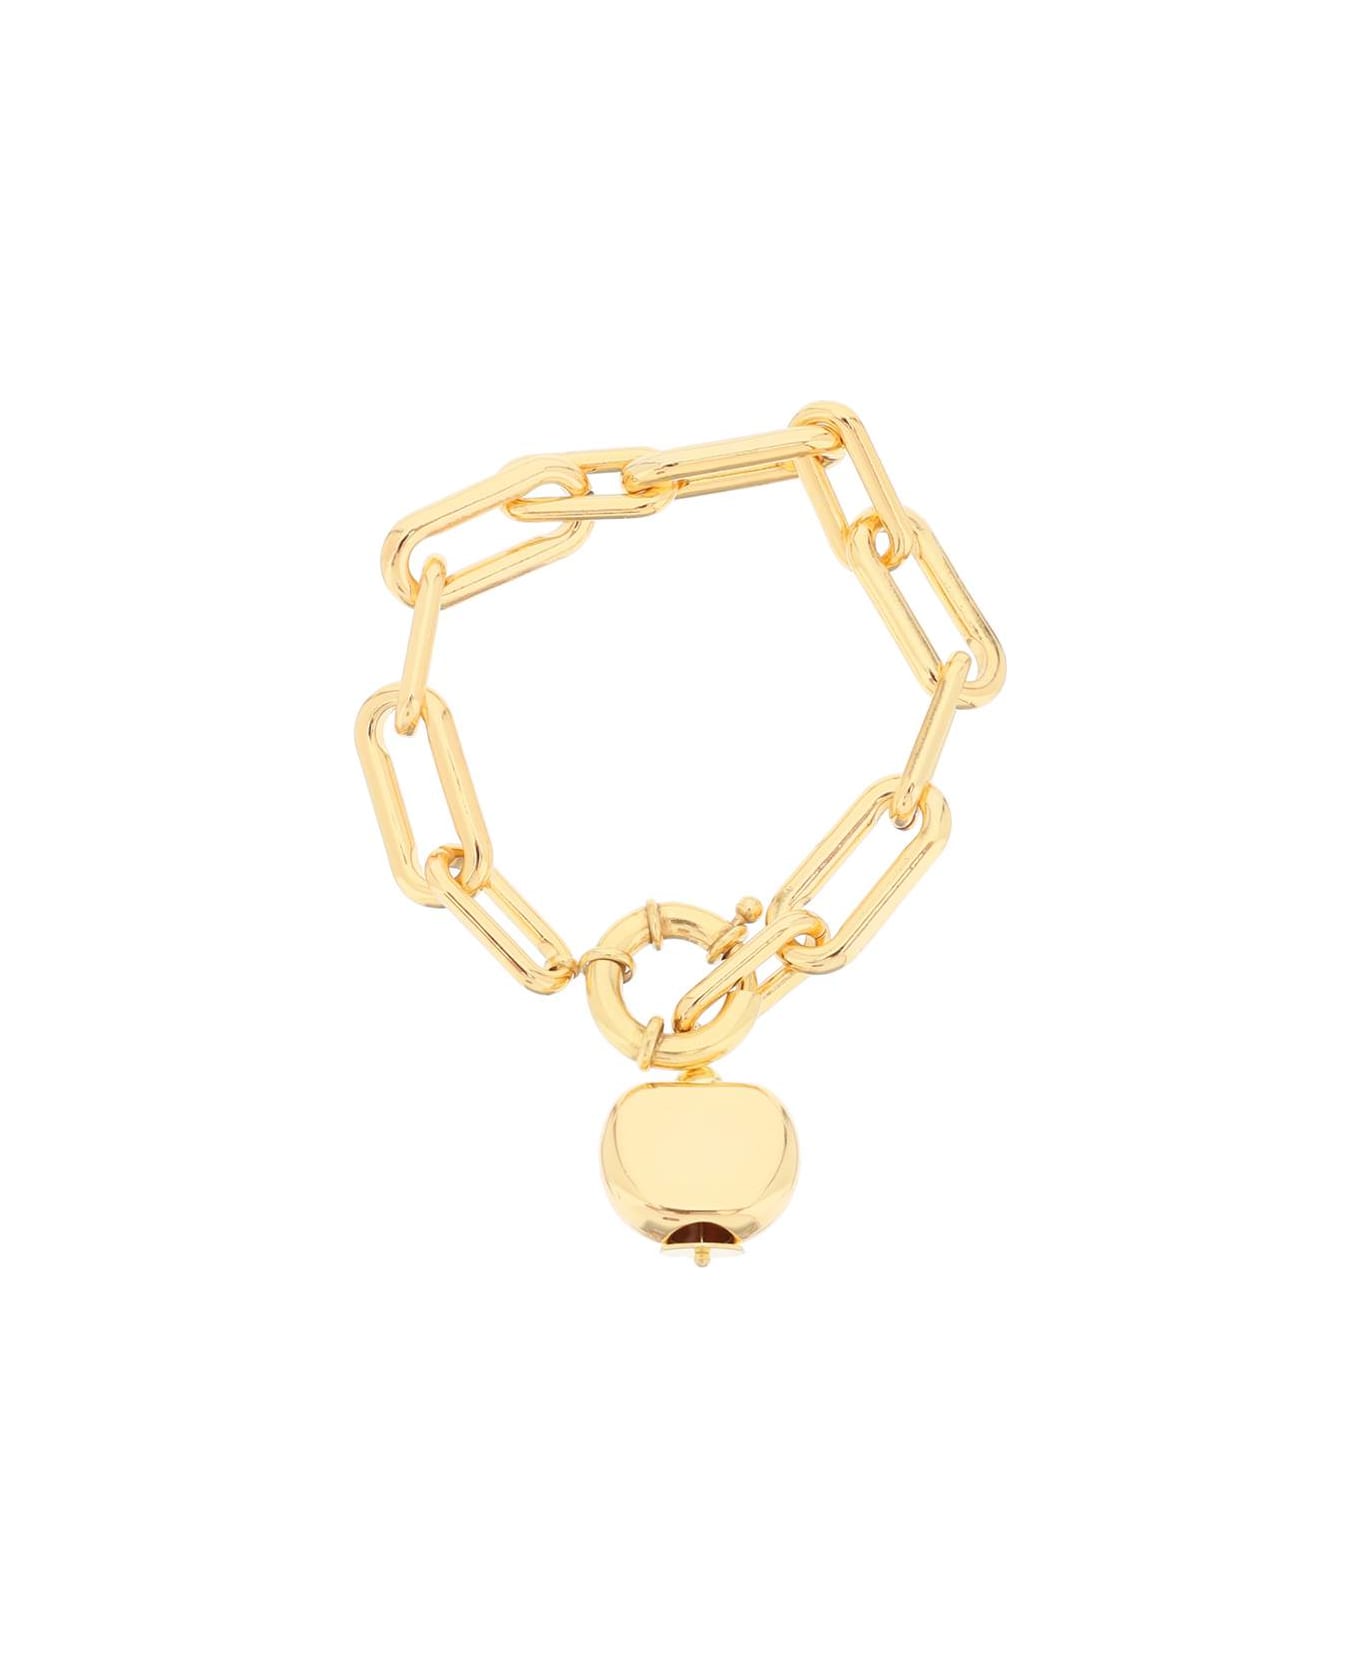 Timeless Pearly Chain Bracelet With Charm - GOLD (Gold)